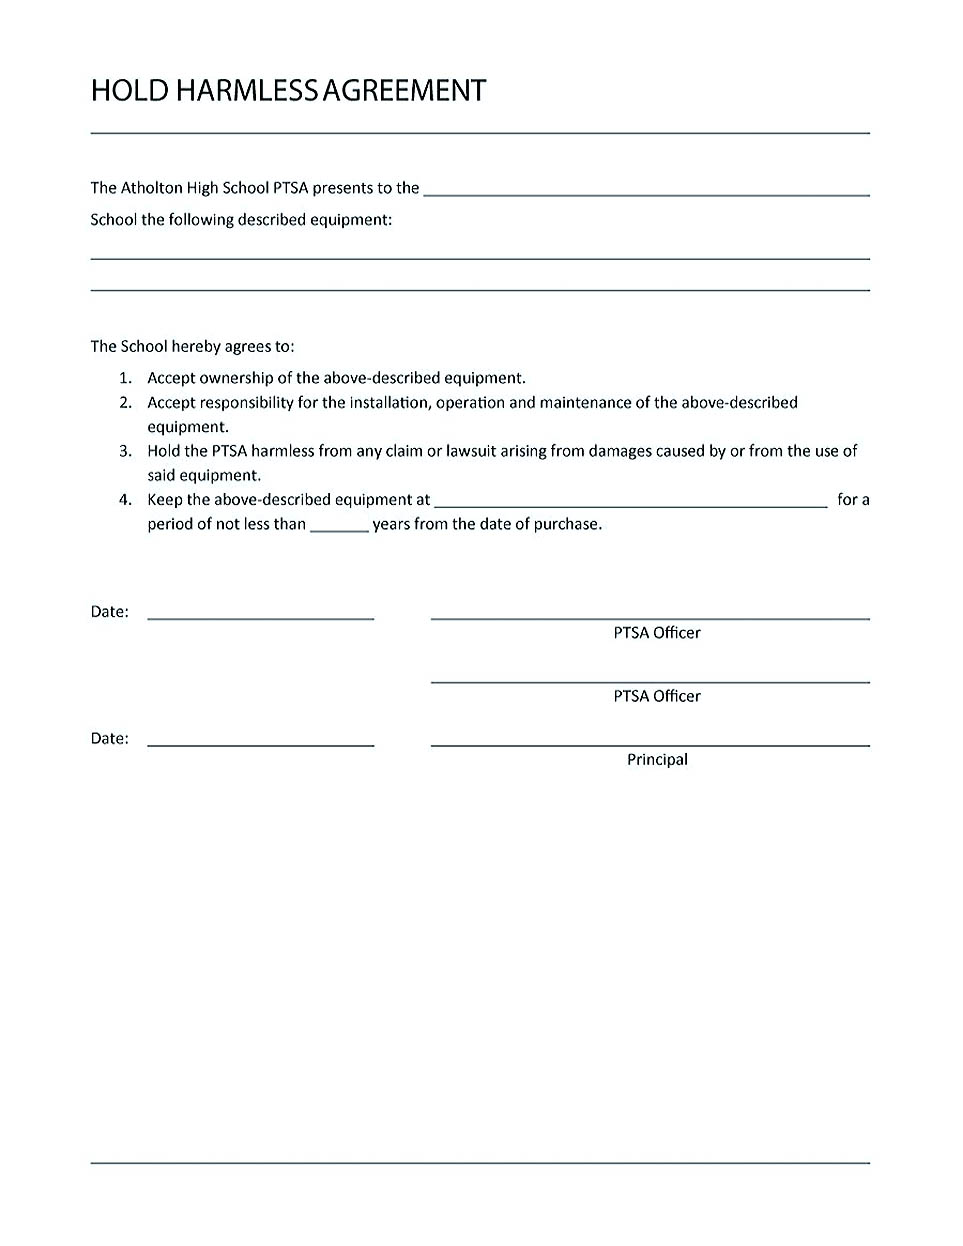 Making Hold Harmless Agreement Template For Different Purposes